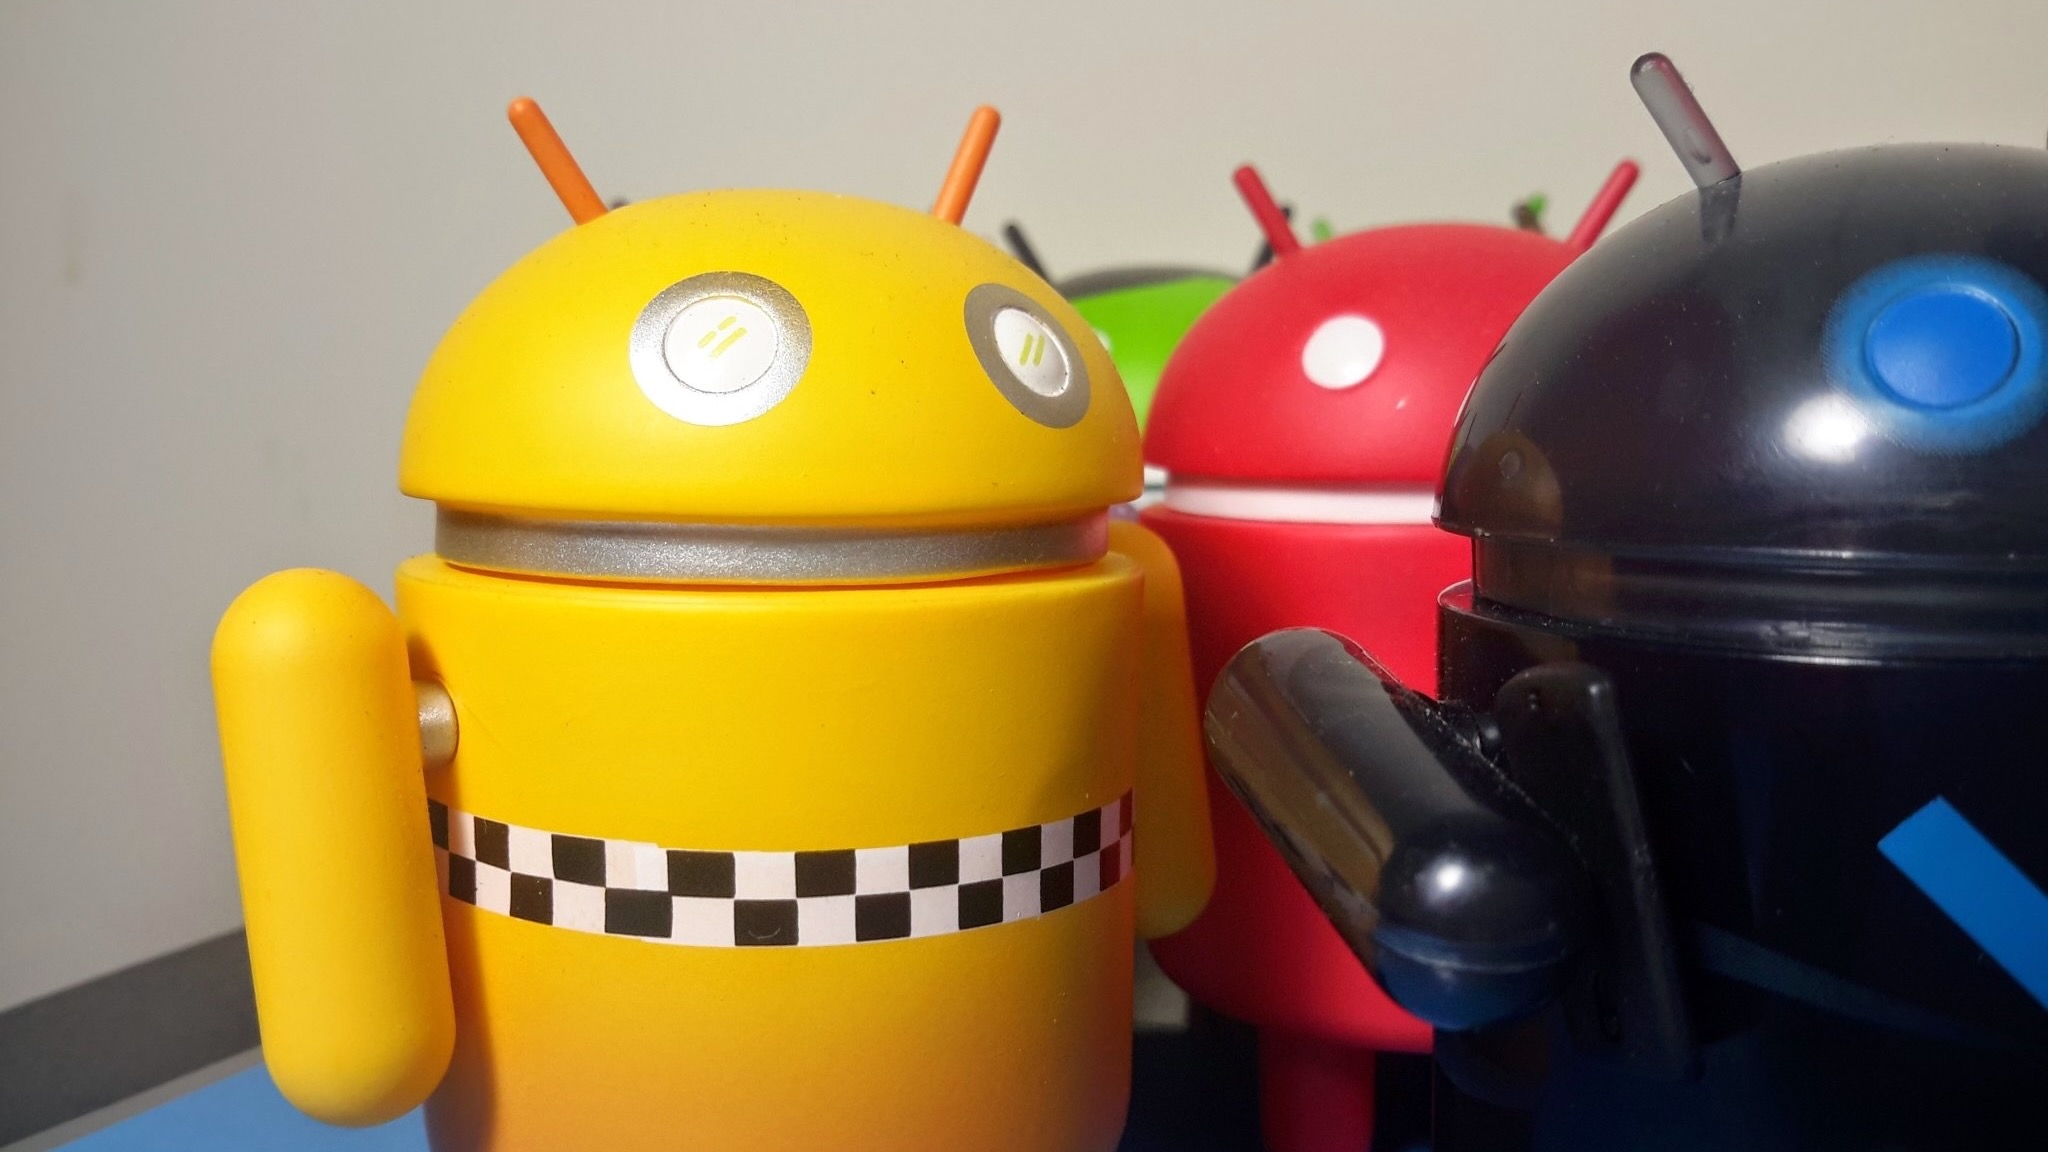 Android figures